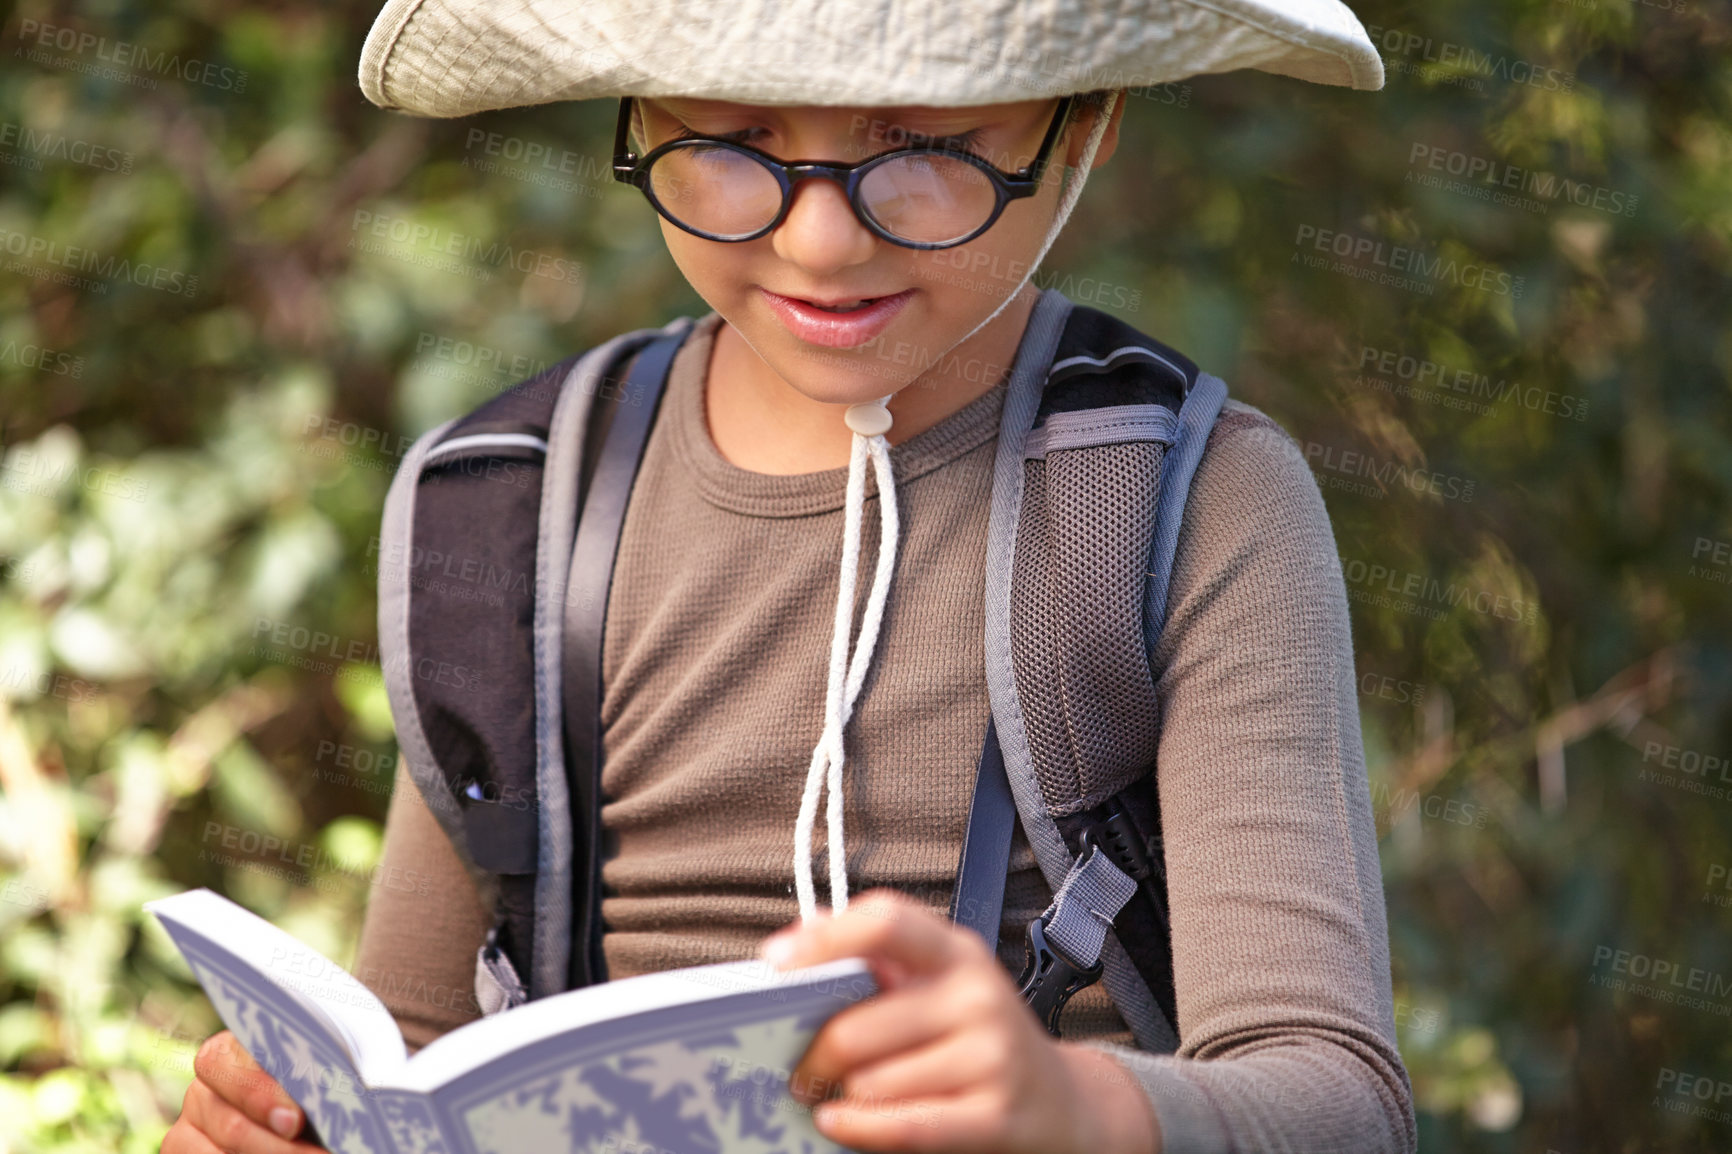 Buy stock photo Happy, little boy and reading book in forest for travel guide, adventure or outdoor discovery. Male person, child or kid with glasses, hat and notebook for story, exploration or research in nature